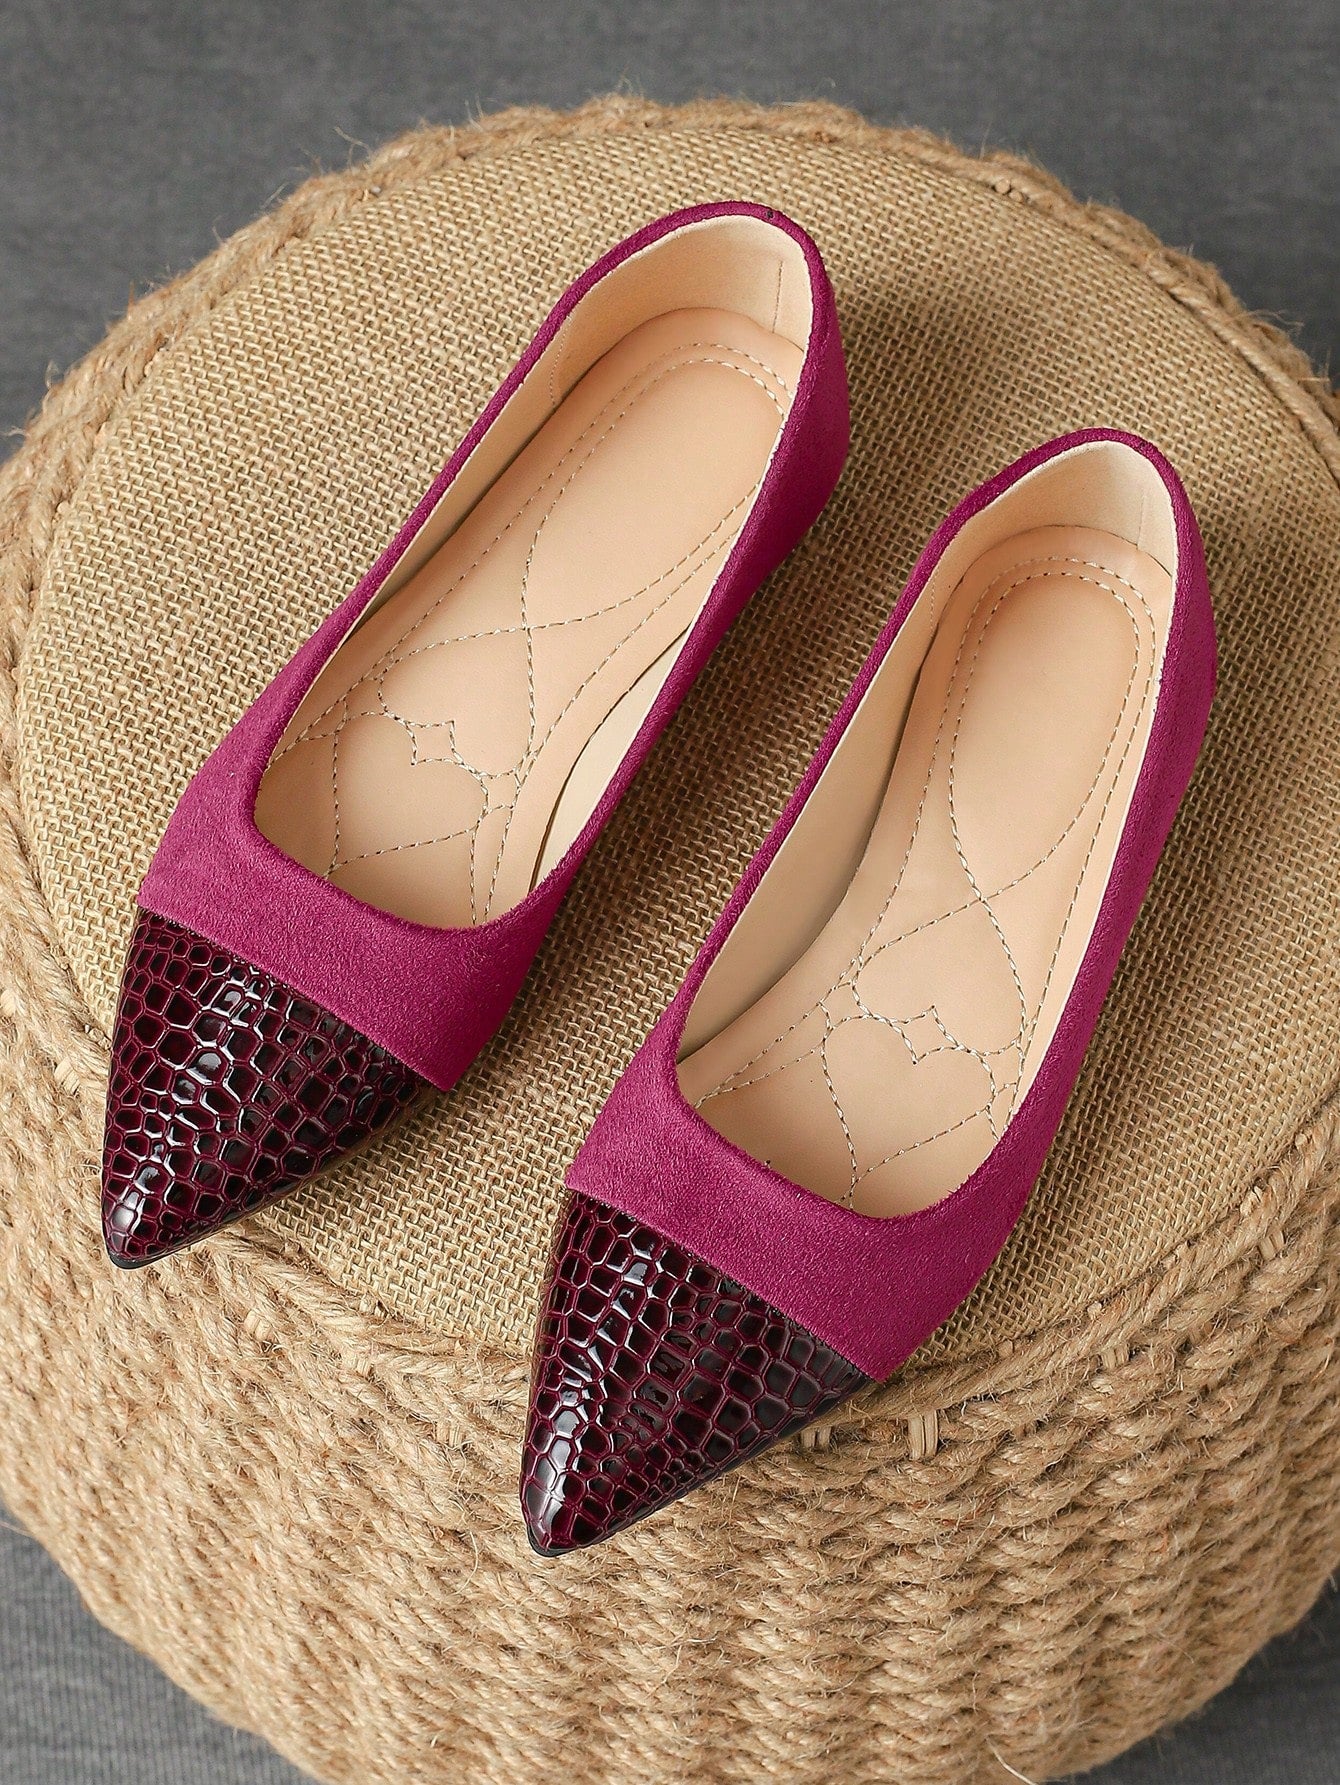 Women's Patchwork Pointed Toe Flat Shoes, Workwear, Black, Autumn-Red Violet-1